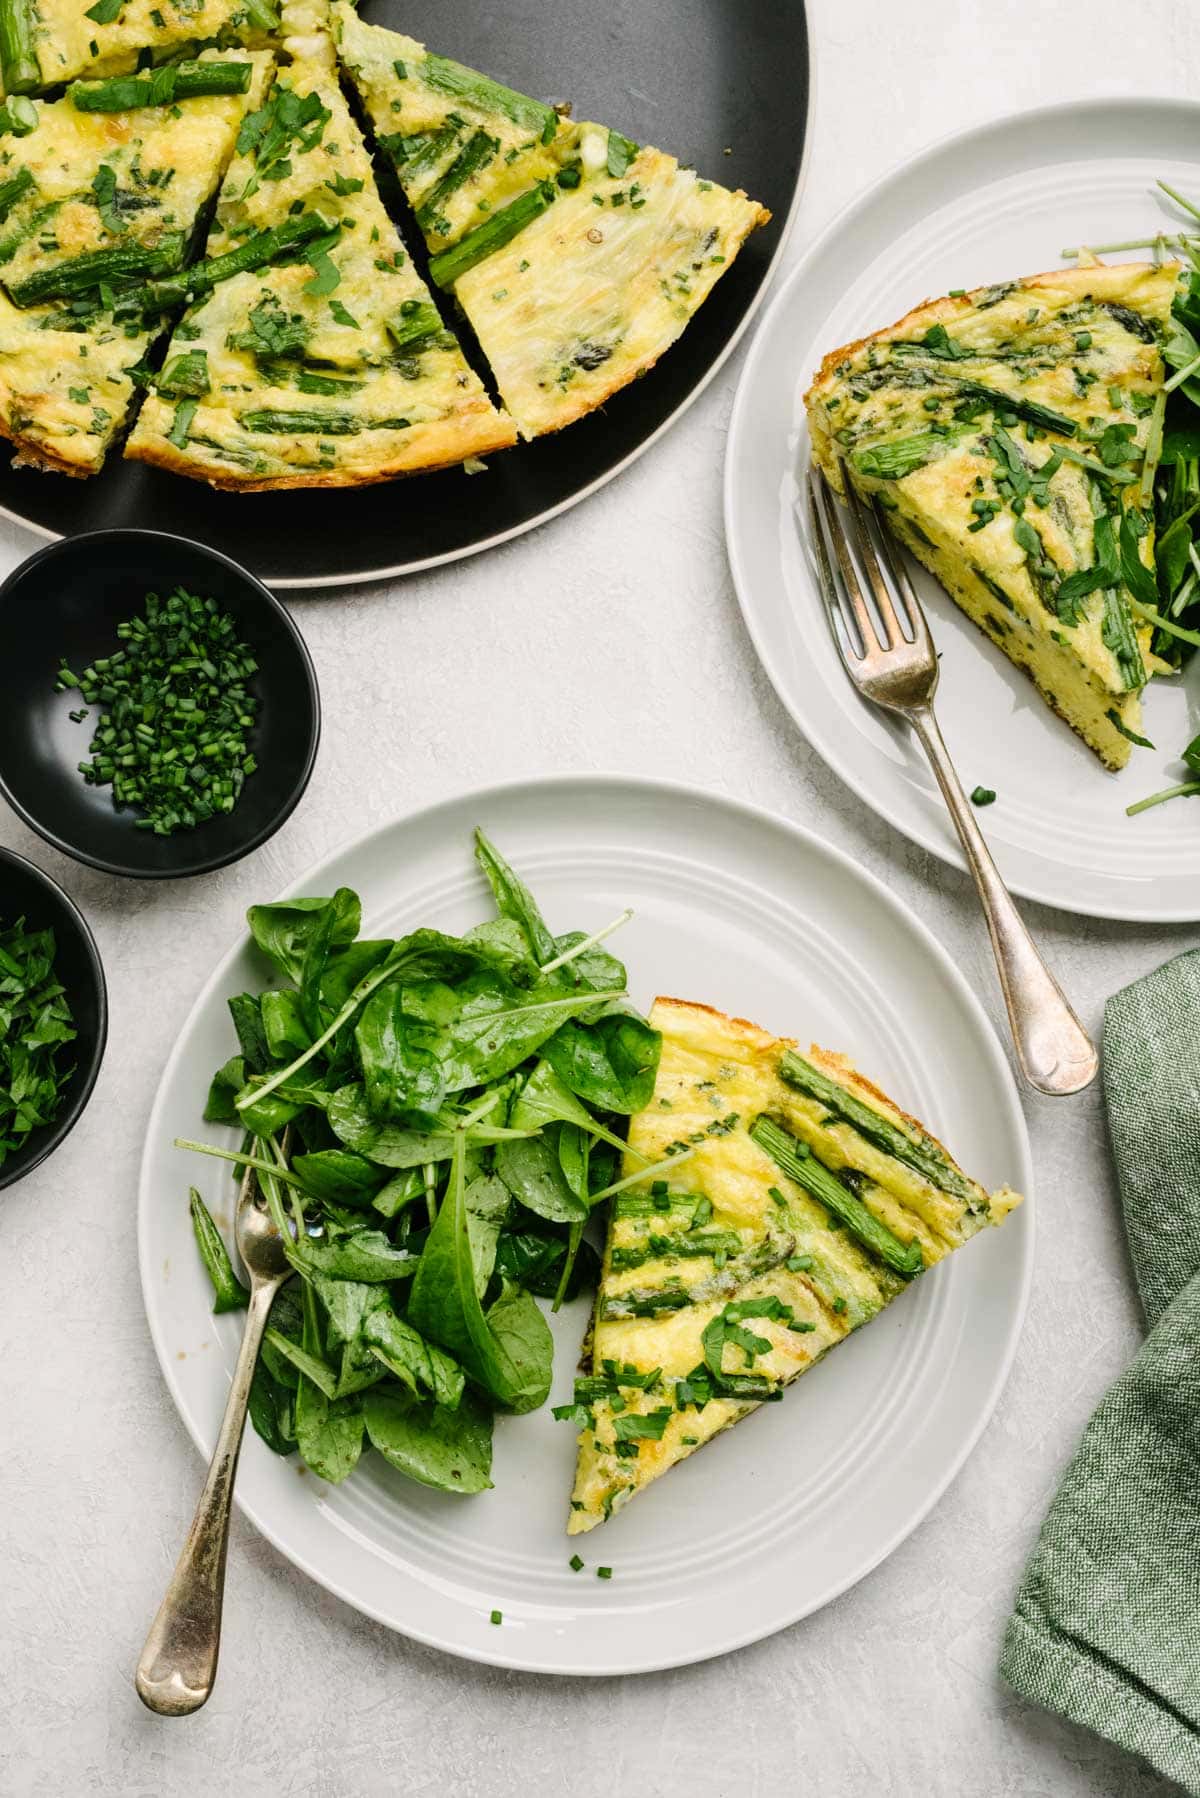 Two plates with asparagus frittata slices and tossed green salads as well as a cast iron skillet with the remaining frittata slices on a concrete background; a green linen napkin and small bowls filled with chopped fresh chives and parsley surround the plates and skillet.